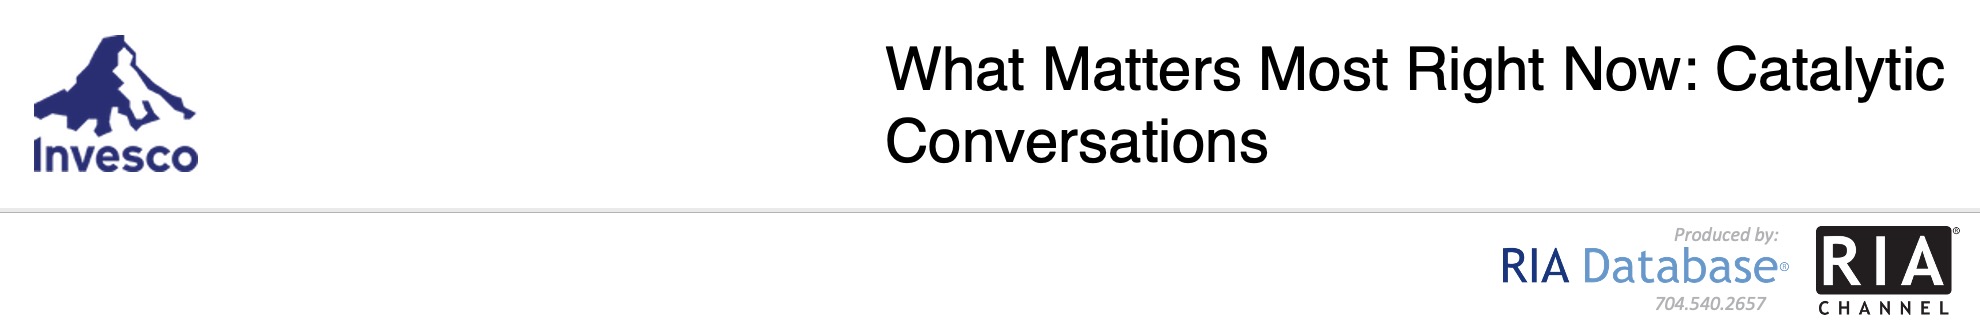 Invesco - What Matters Most Right Now: Catalytic Conversations